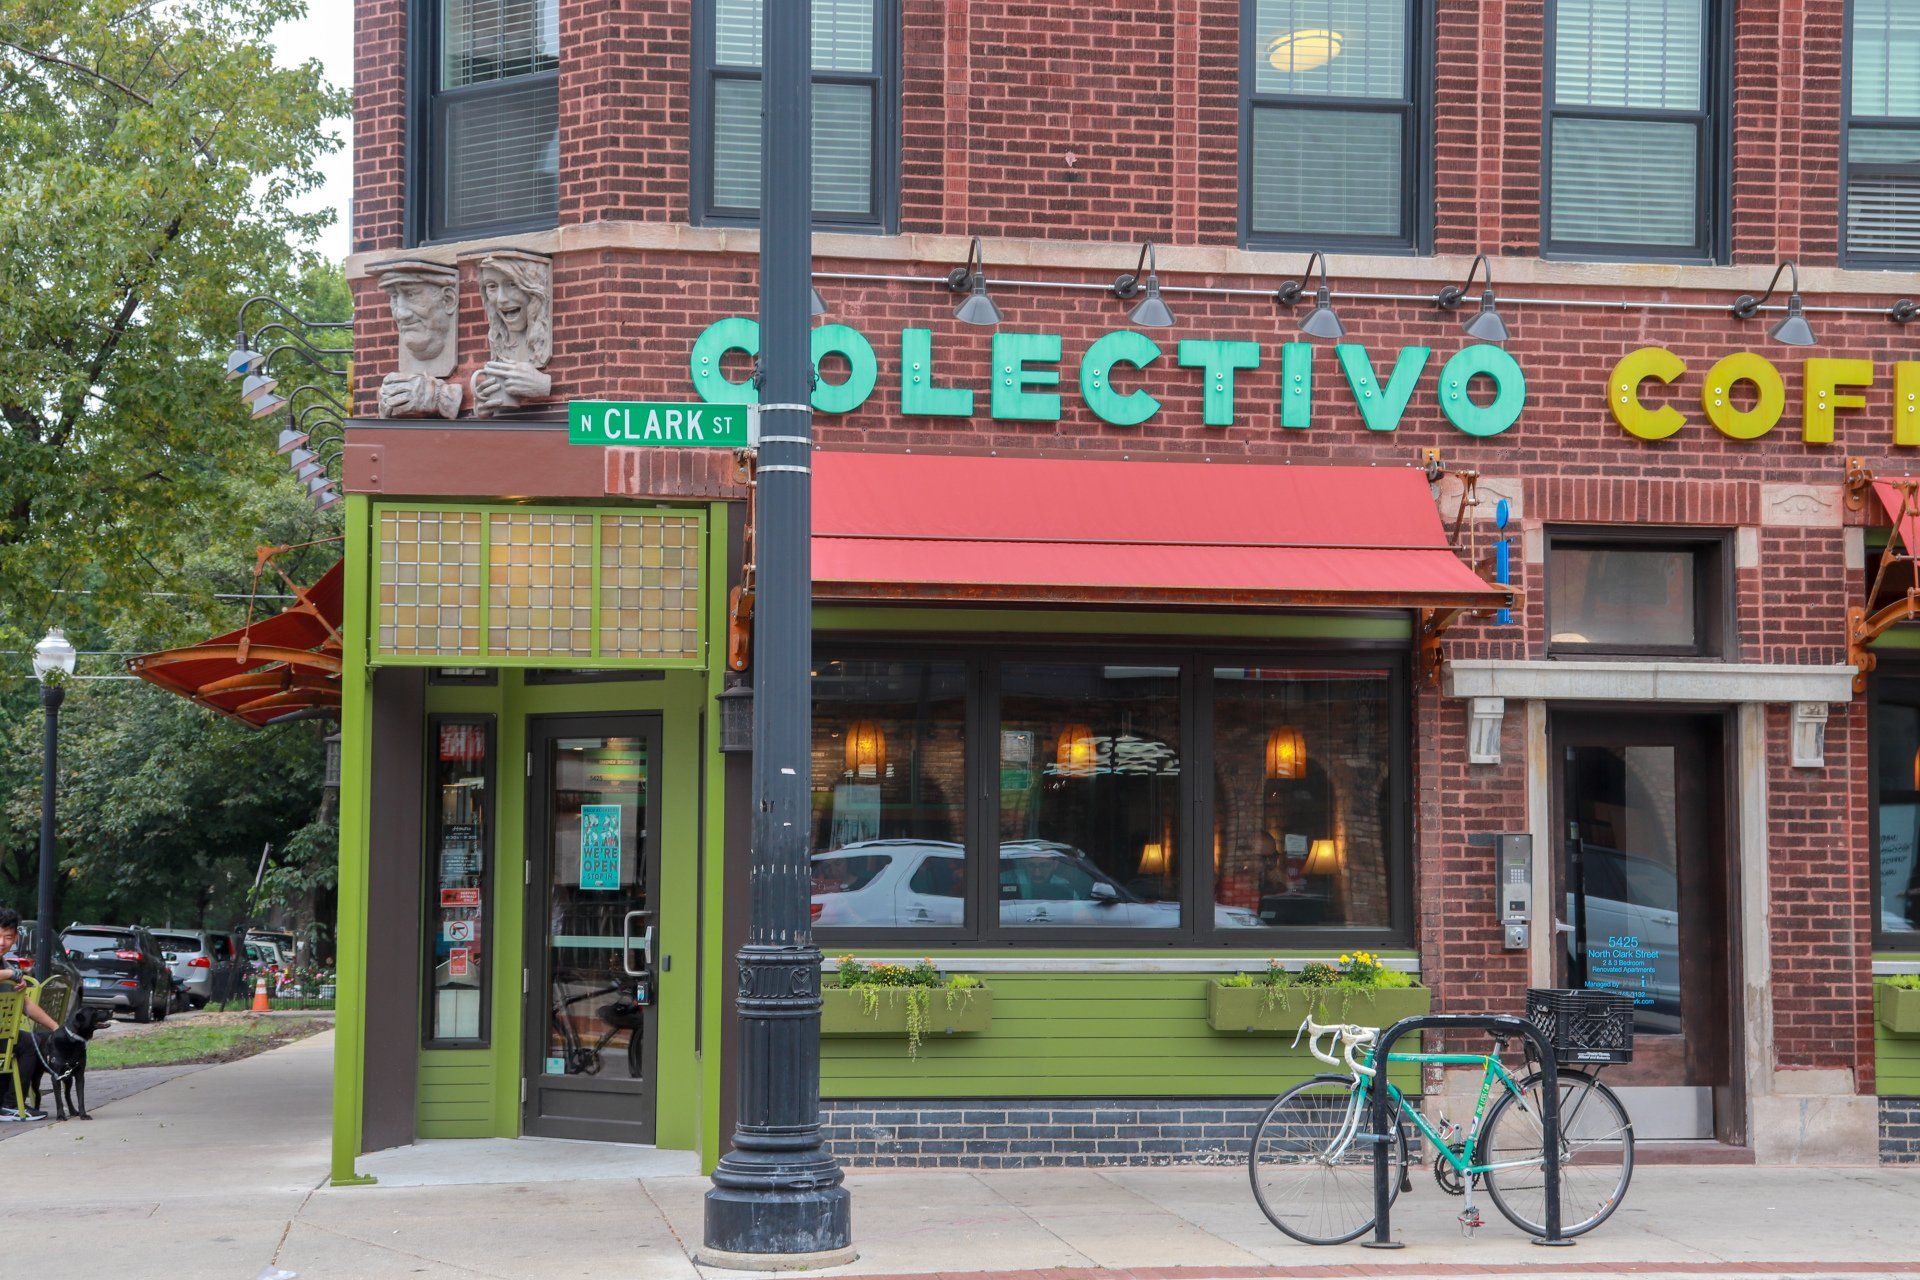 A bicycle is parked in front of the colectivo coffee shop.